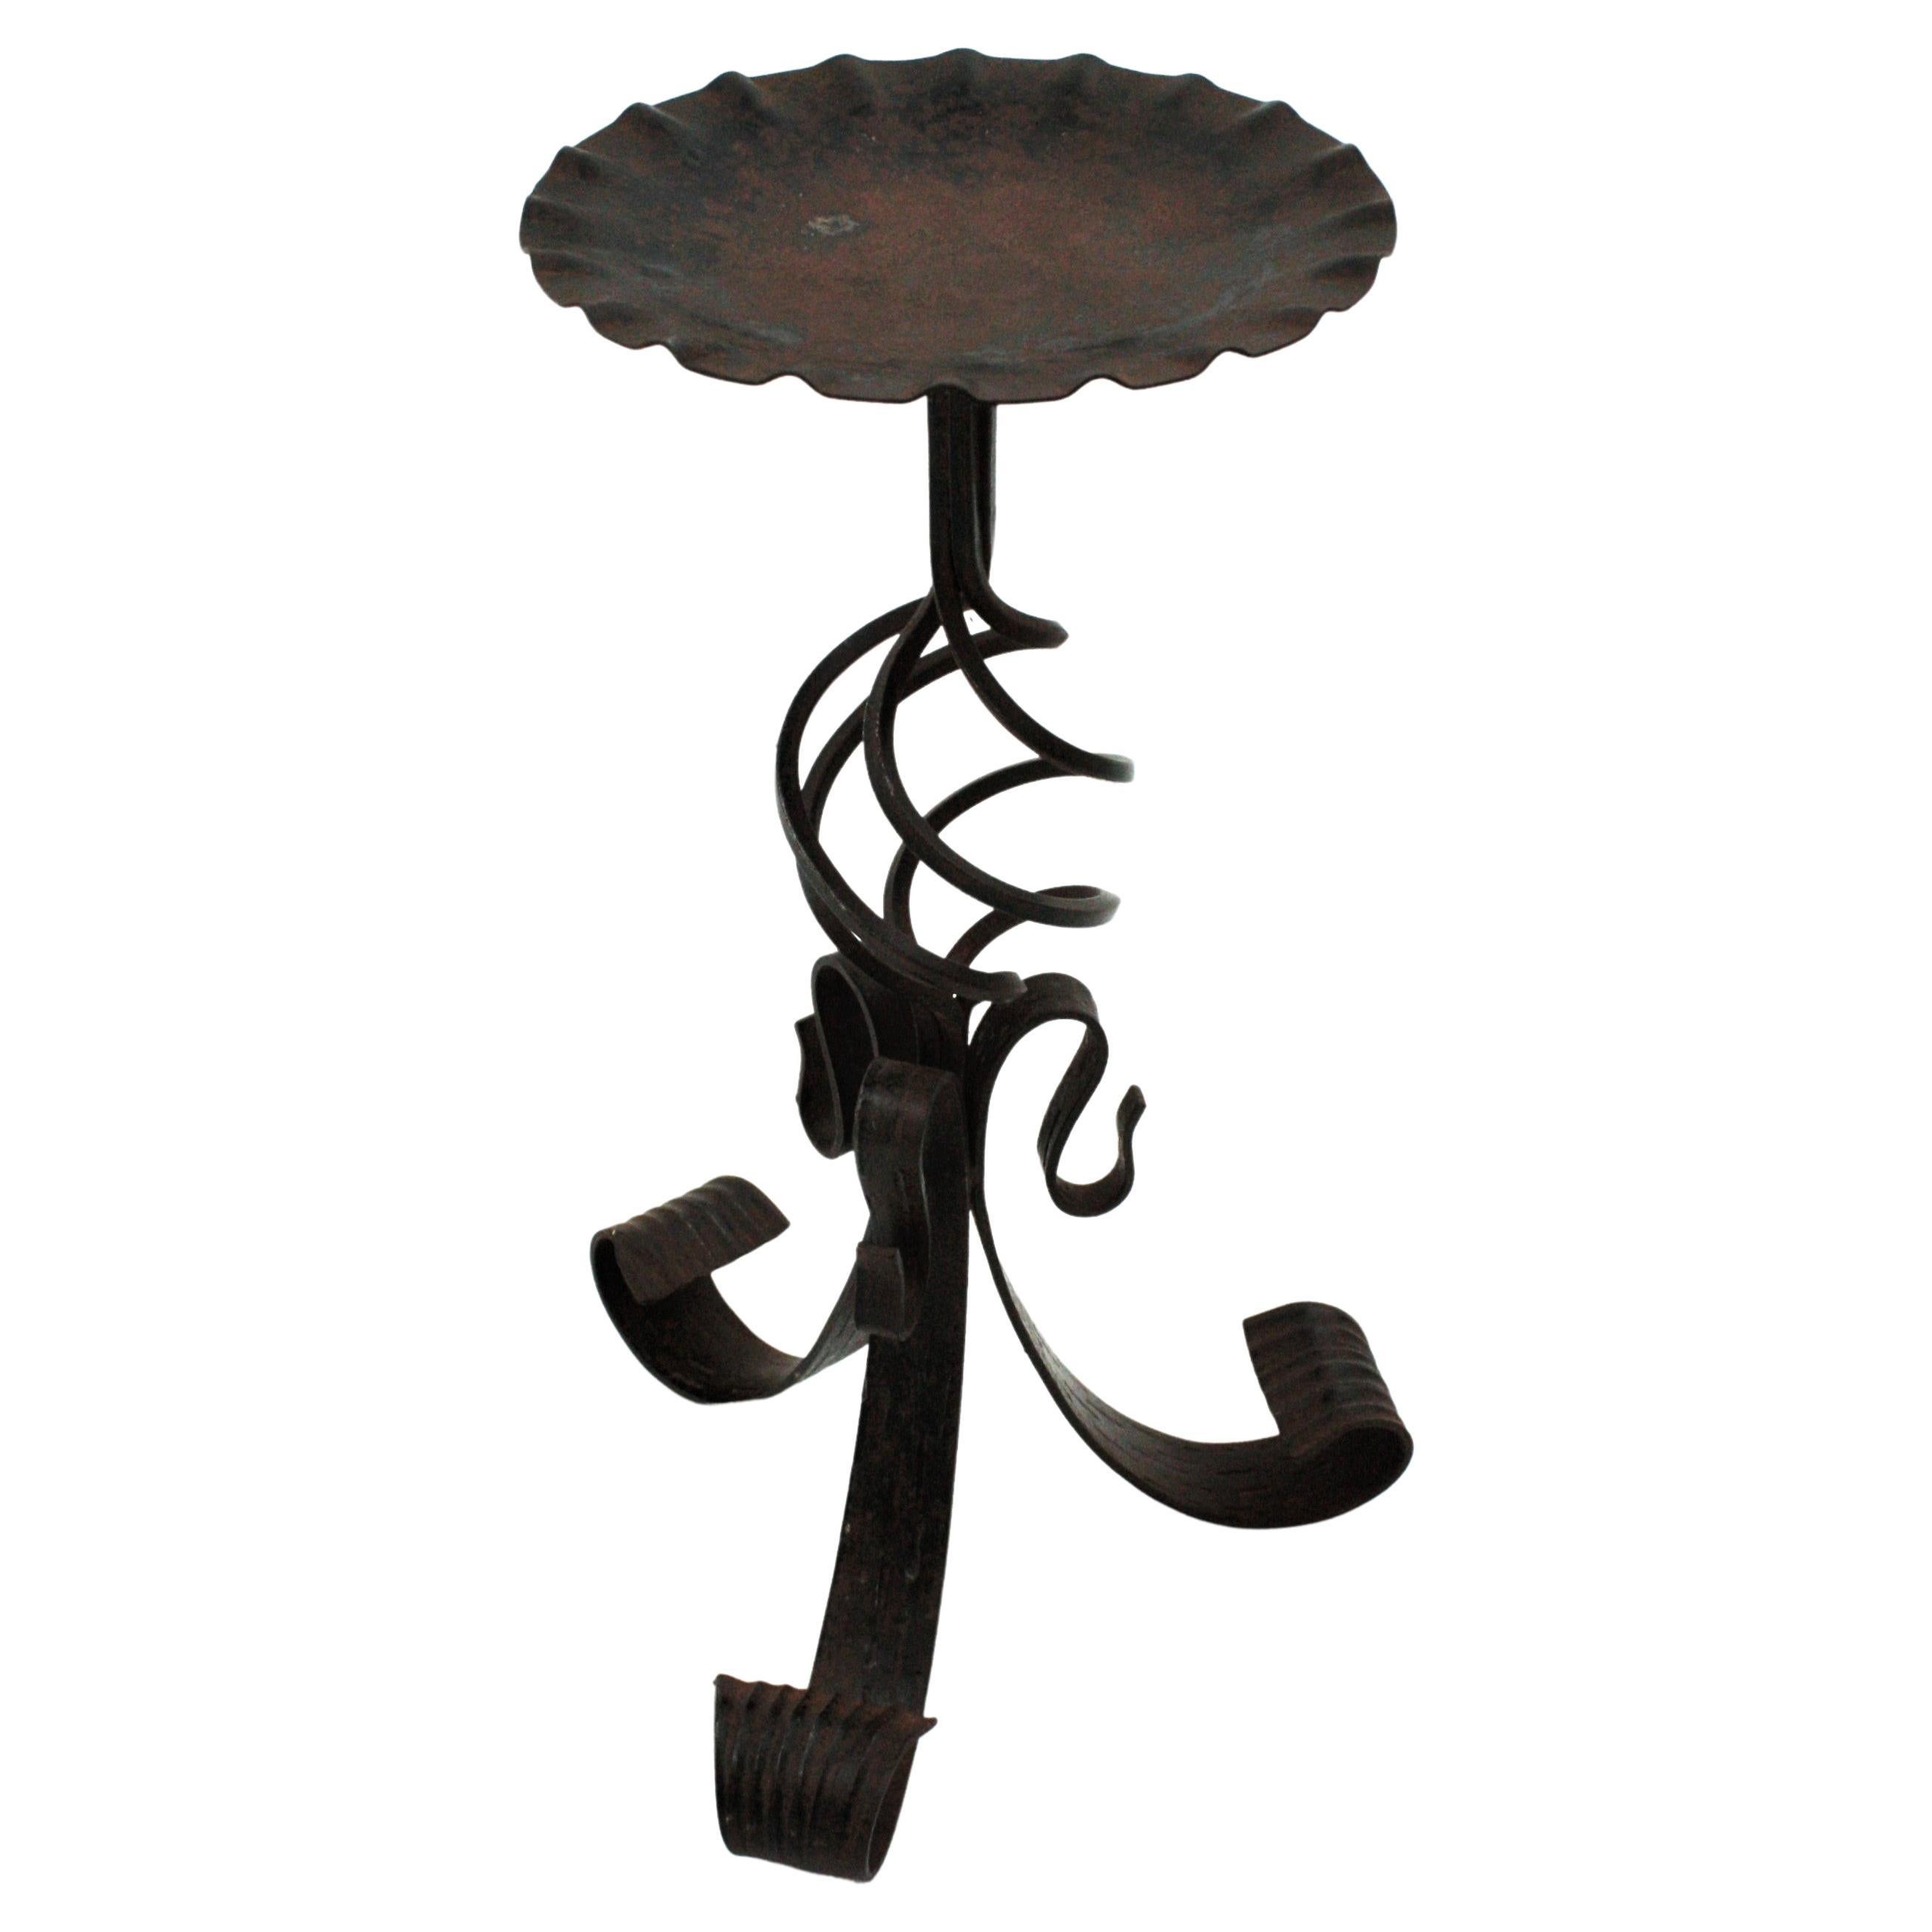 Spanish Side Table, Wrought Iron
Small Spanish Gilt Iron Drinks Table Gueridon, End or Side Table. Manufactured in Spain, 1940s.
This pedestal table has a wavy edged top heavily decored by the Hammer work. It stands on a tripod base with scroll